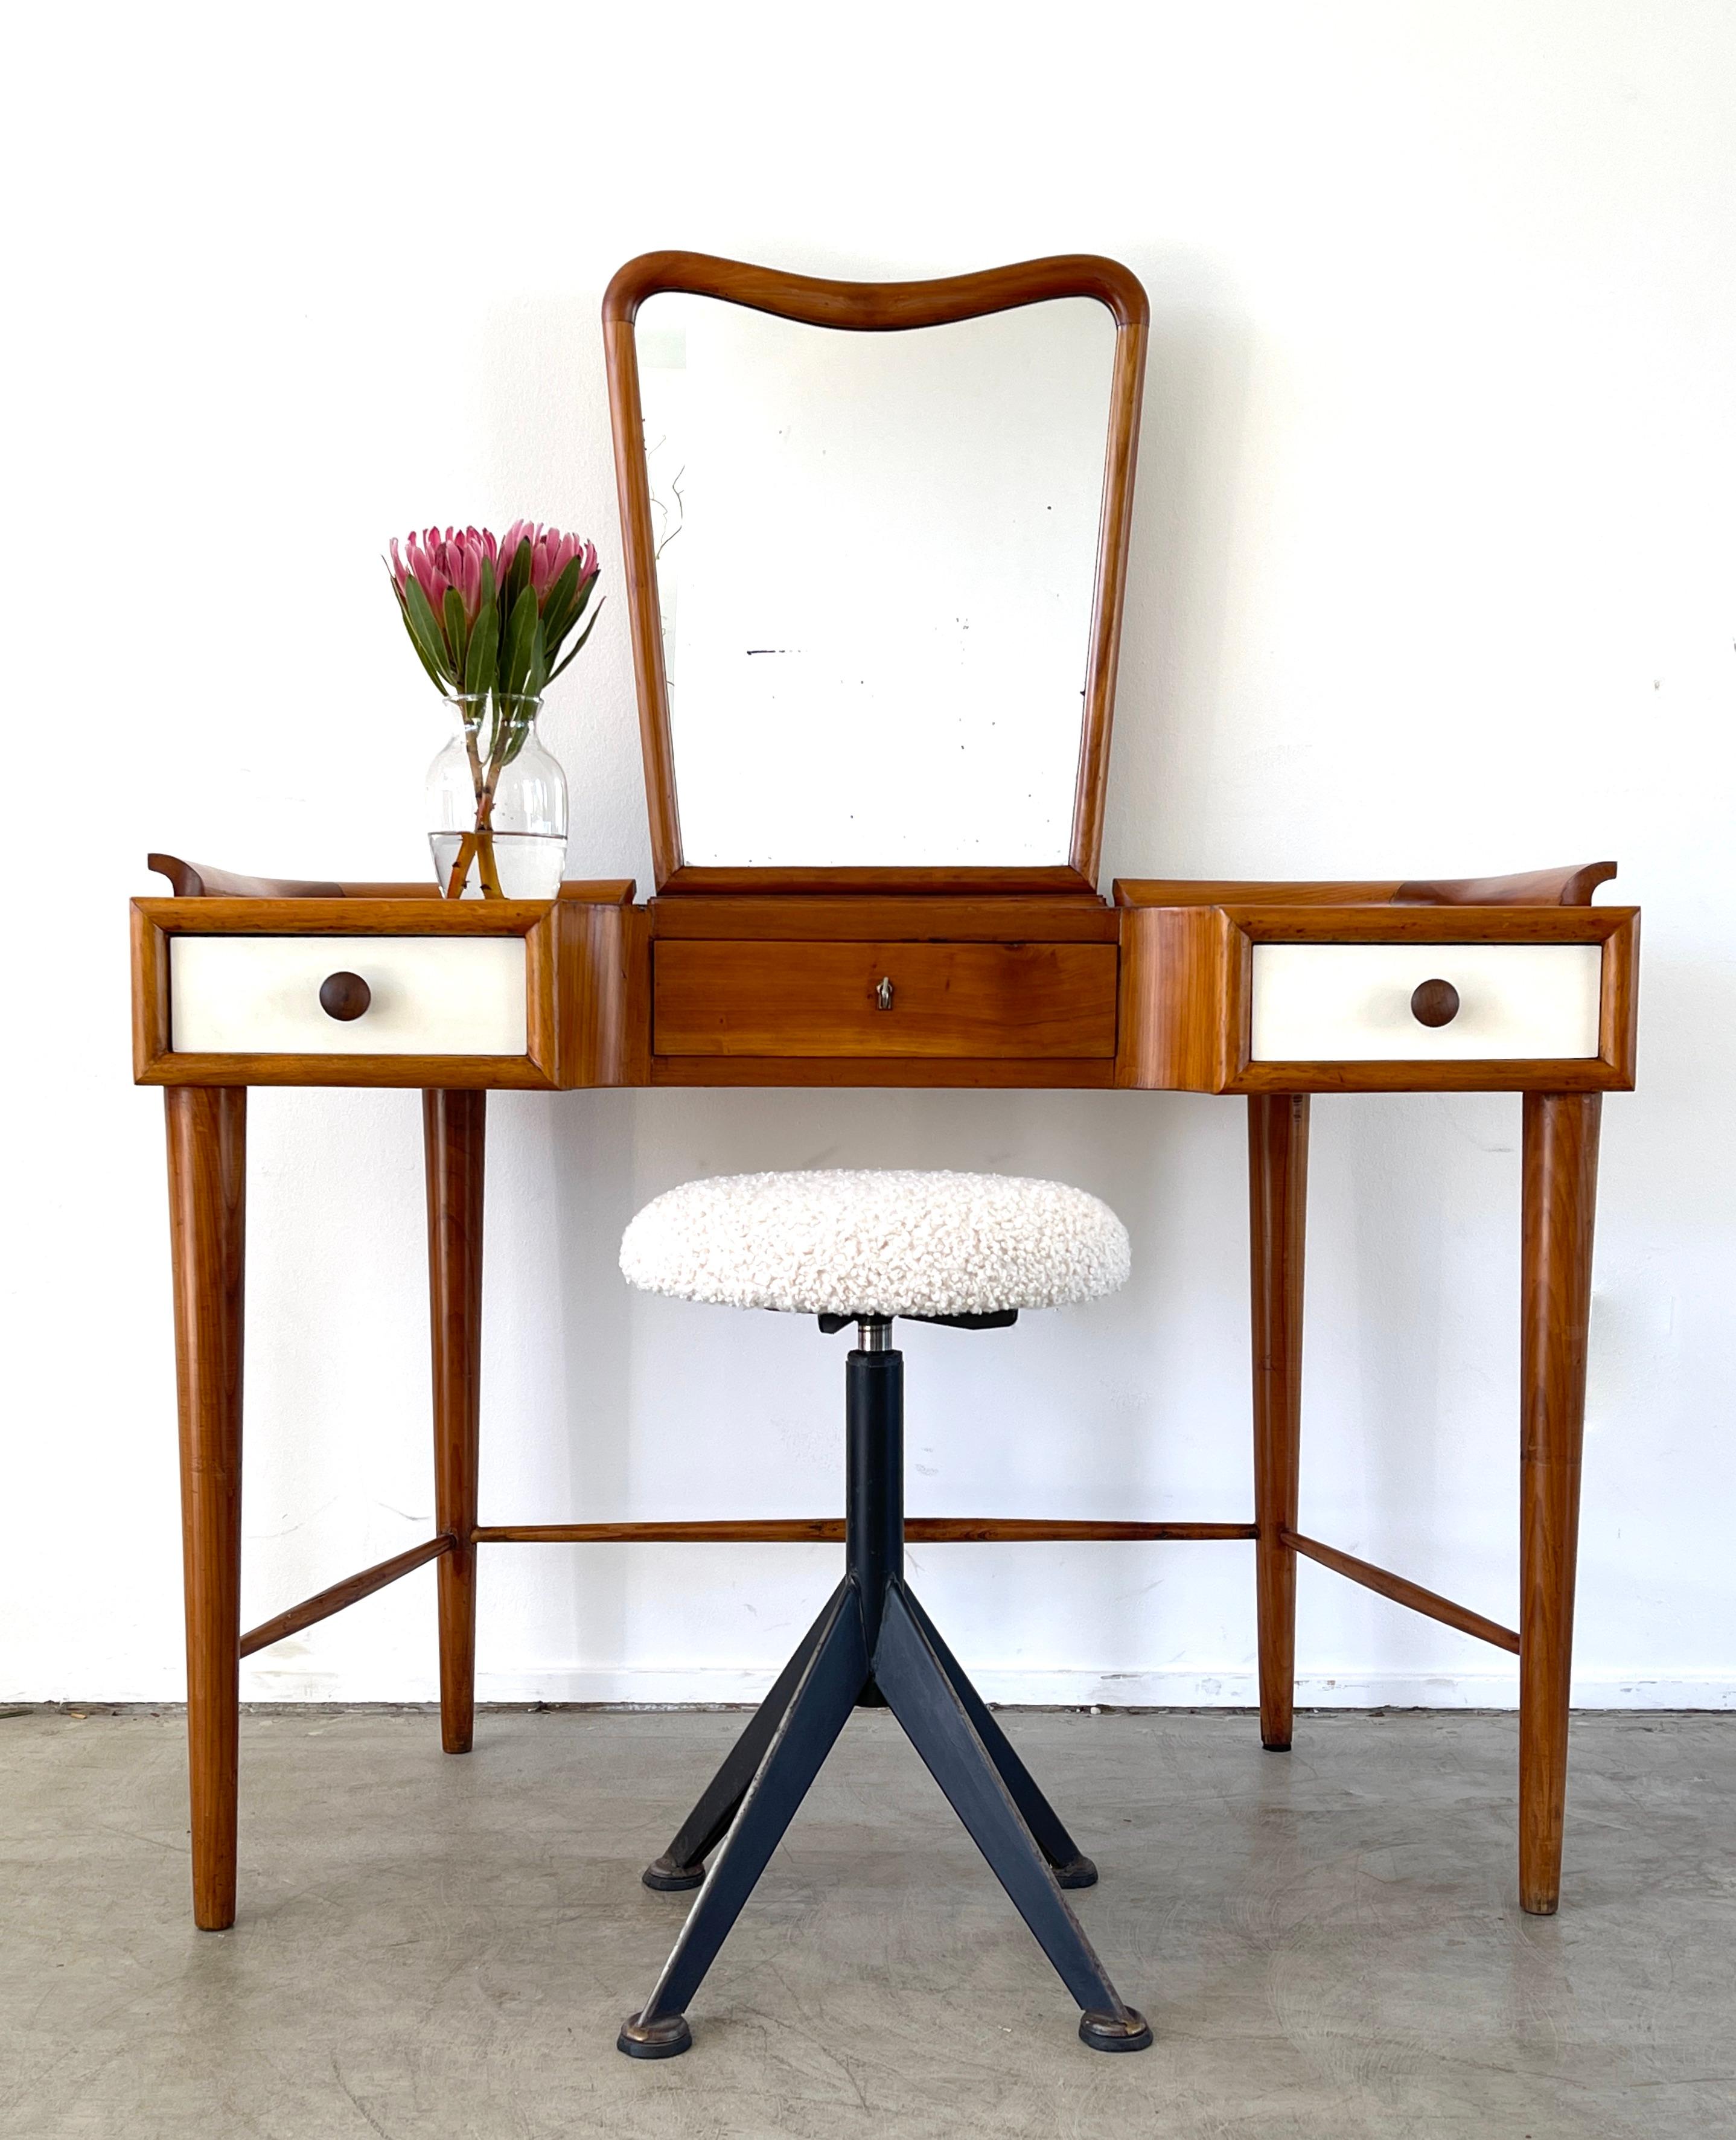 1950's Paolo Buffa attributed vanity or dressing table with polished lacquered wood and three drawers with curved mirror and tapered legs. 
Circa 1950's 

53.75